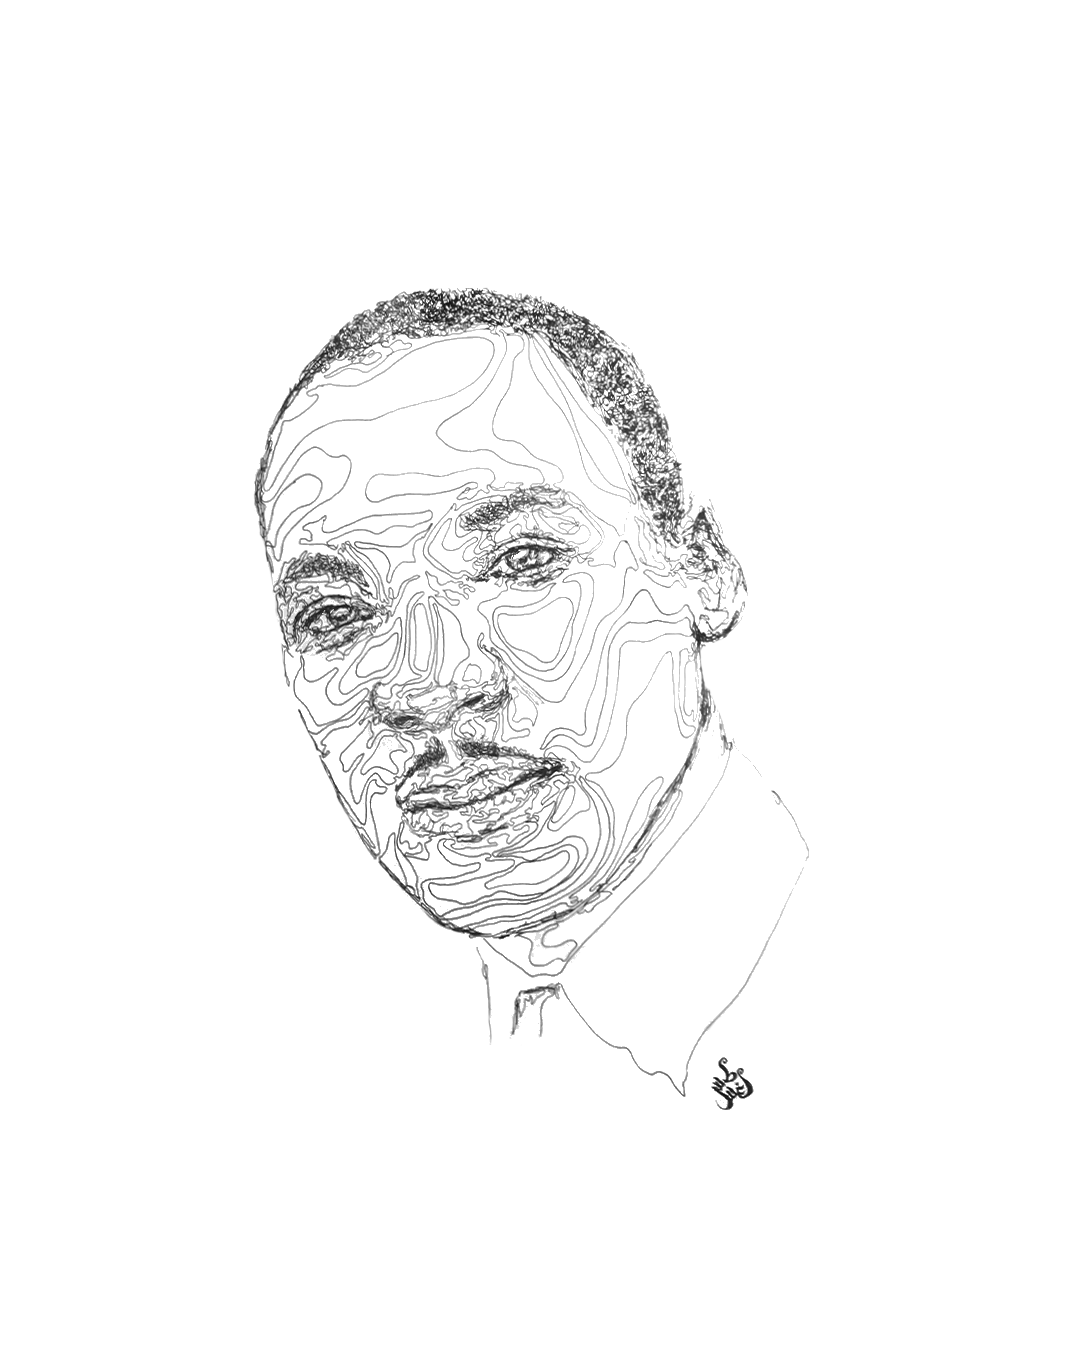 Pen and ink Visiography drawing of Martin Luther King, Jr.